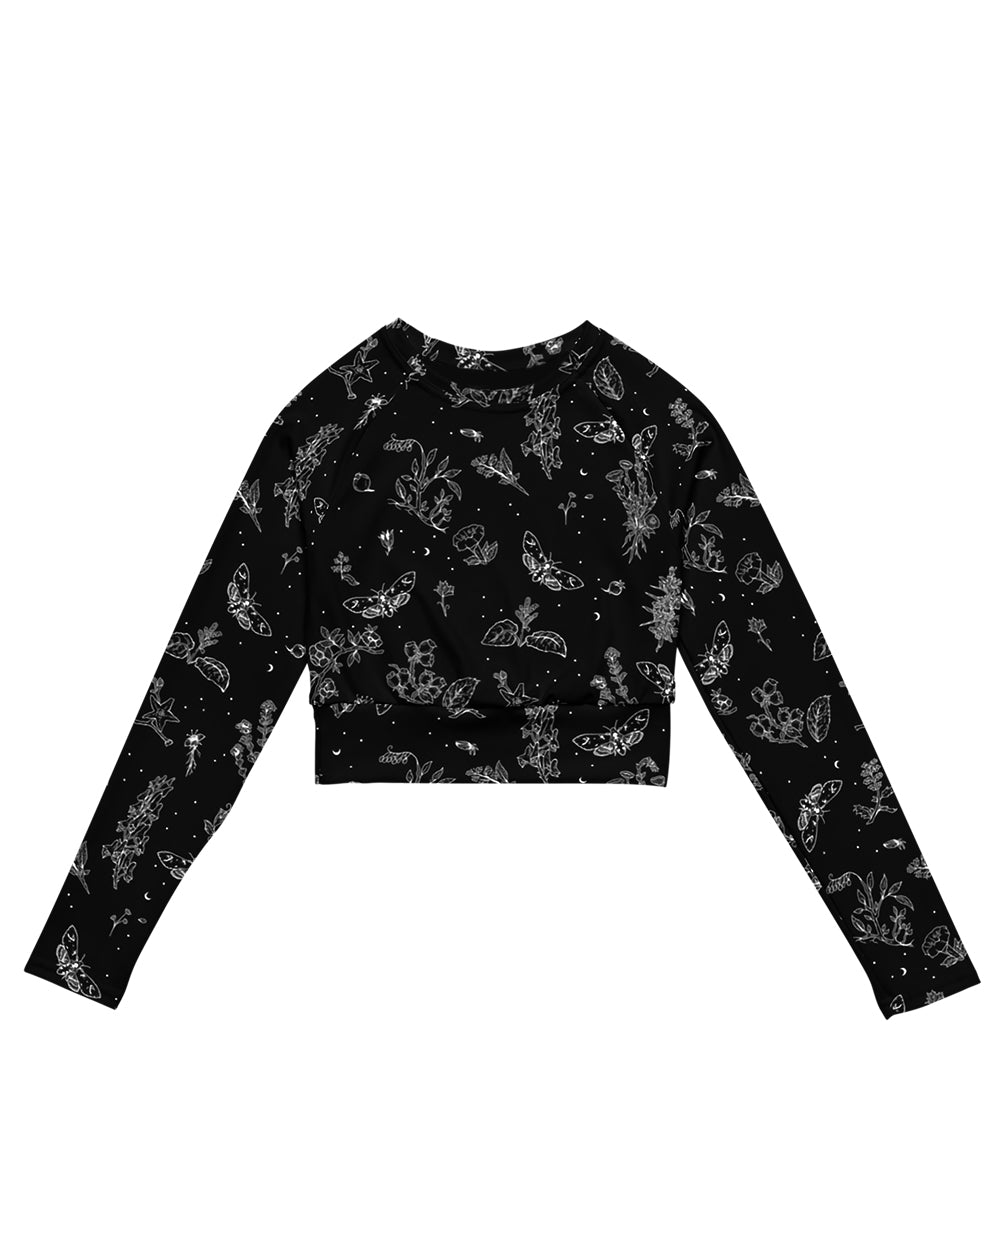 Nightshade Crop Top - Cute Black Witchy Style Gothic Grunge Aesthetic Dark Academia Halloween Pagan Occult Fashion